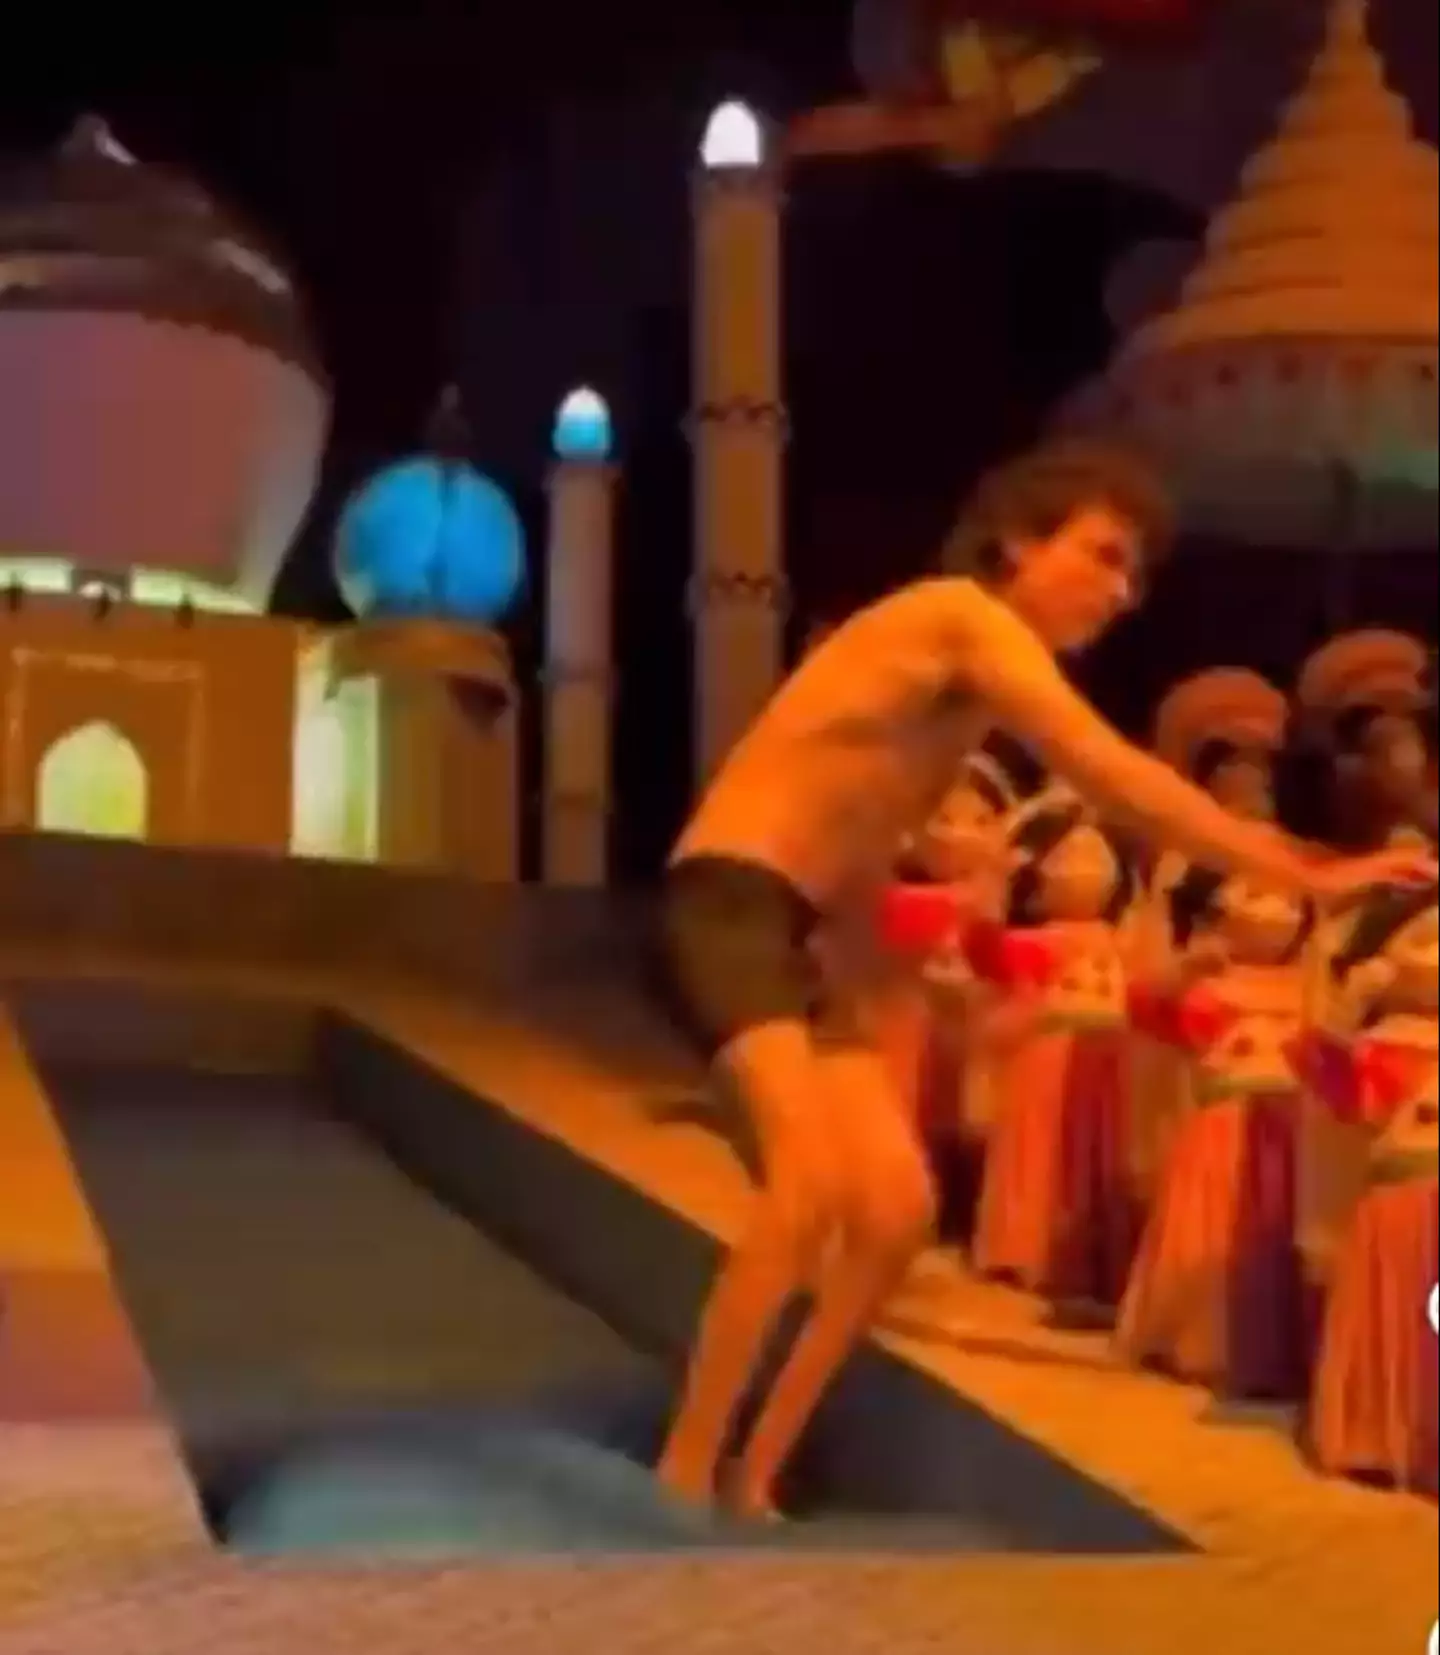 A streaker went onto the It's a Small World ride at Disneyland.